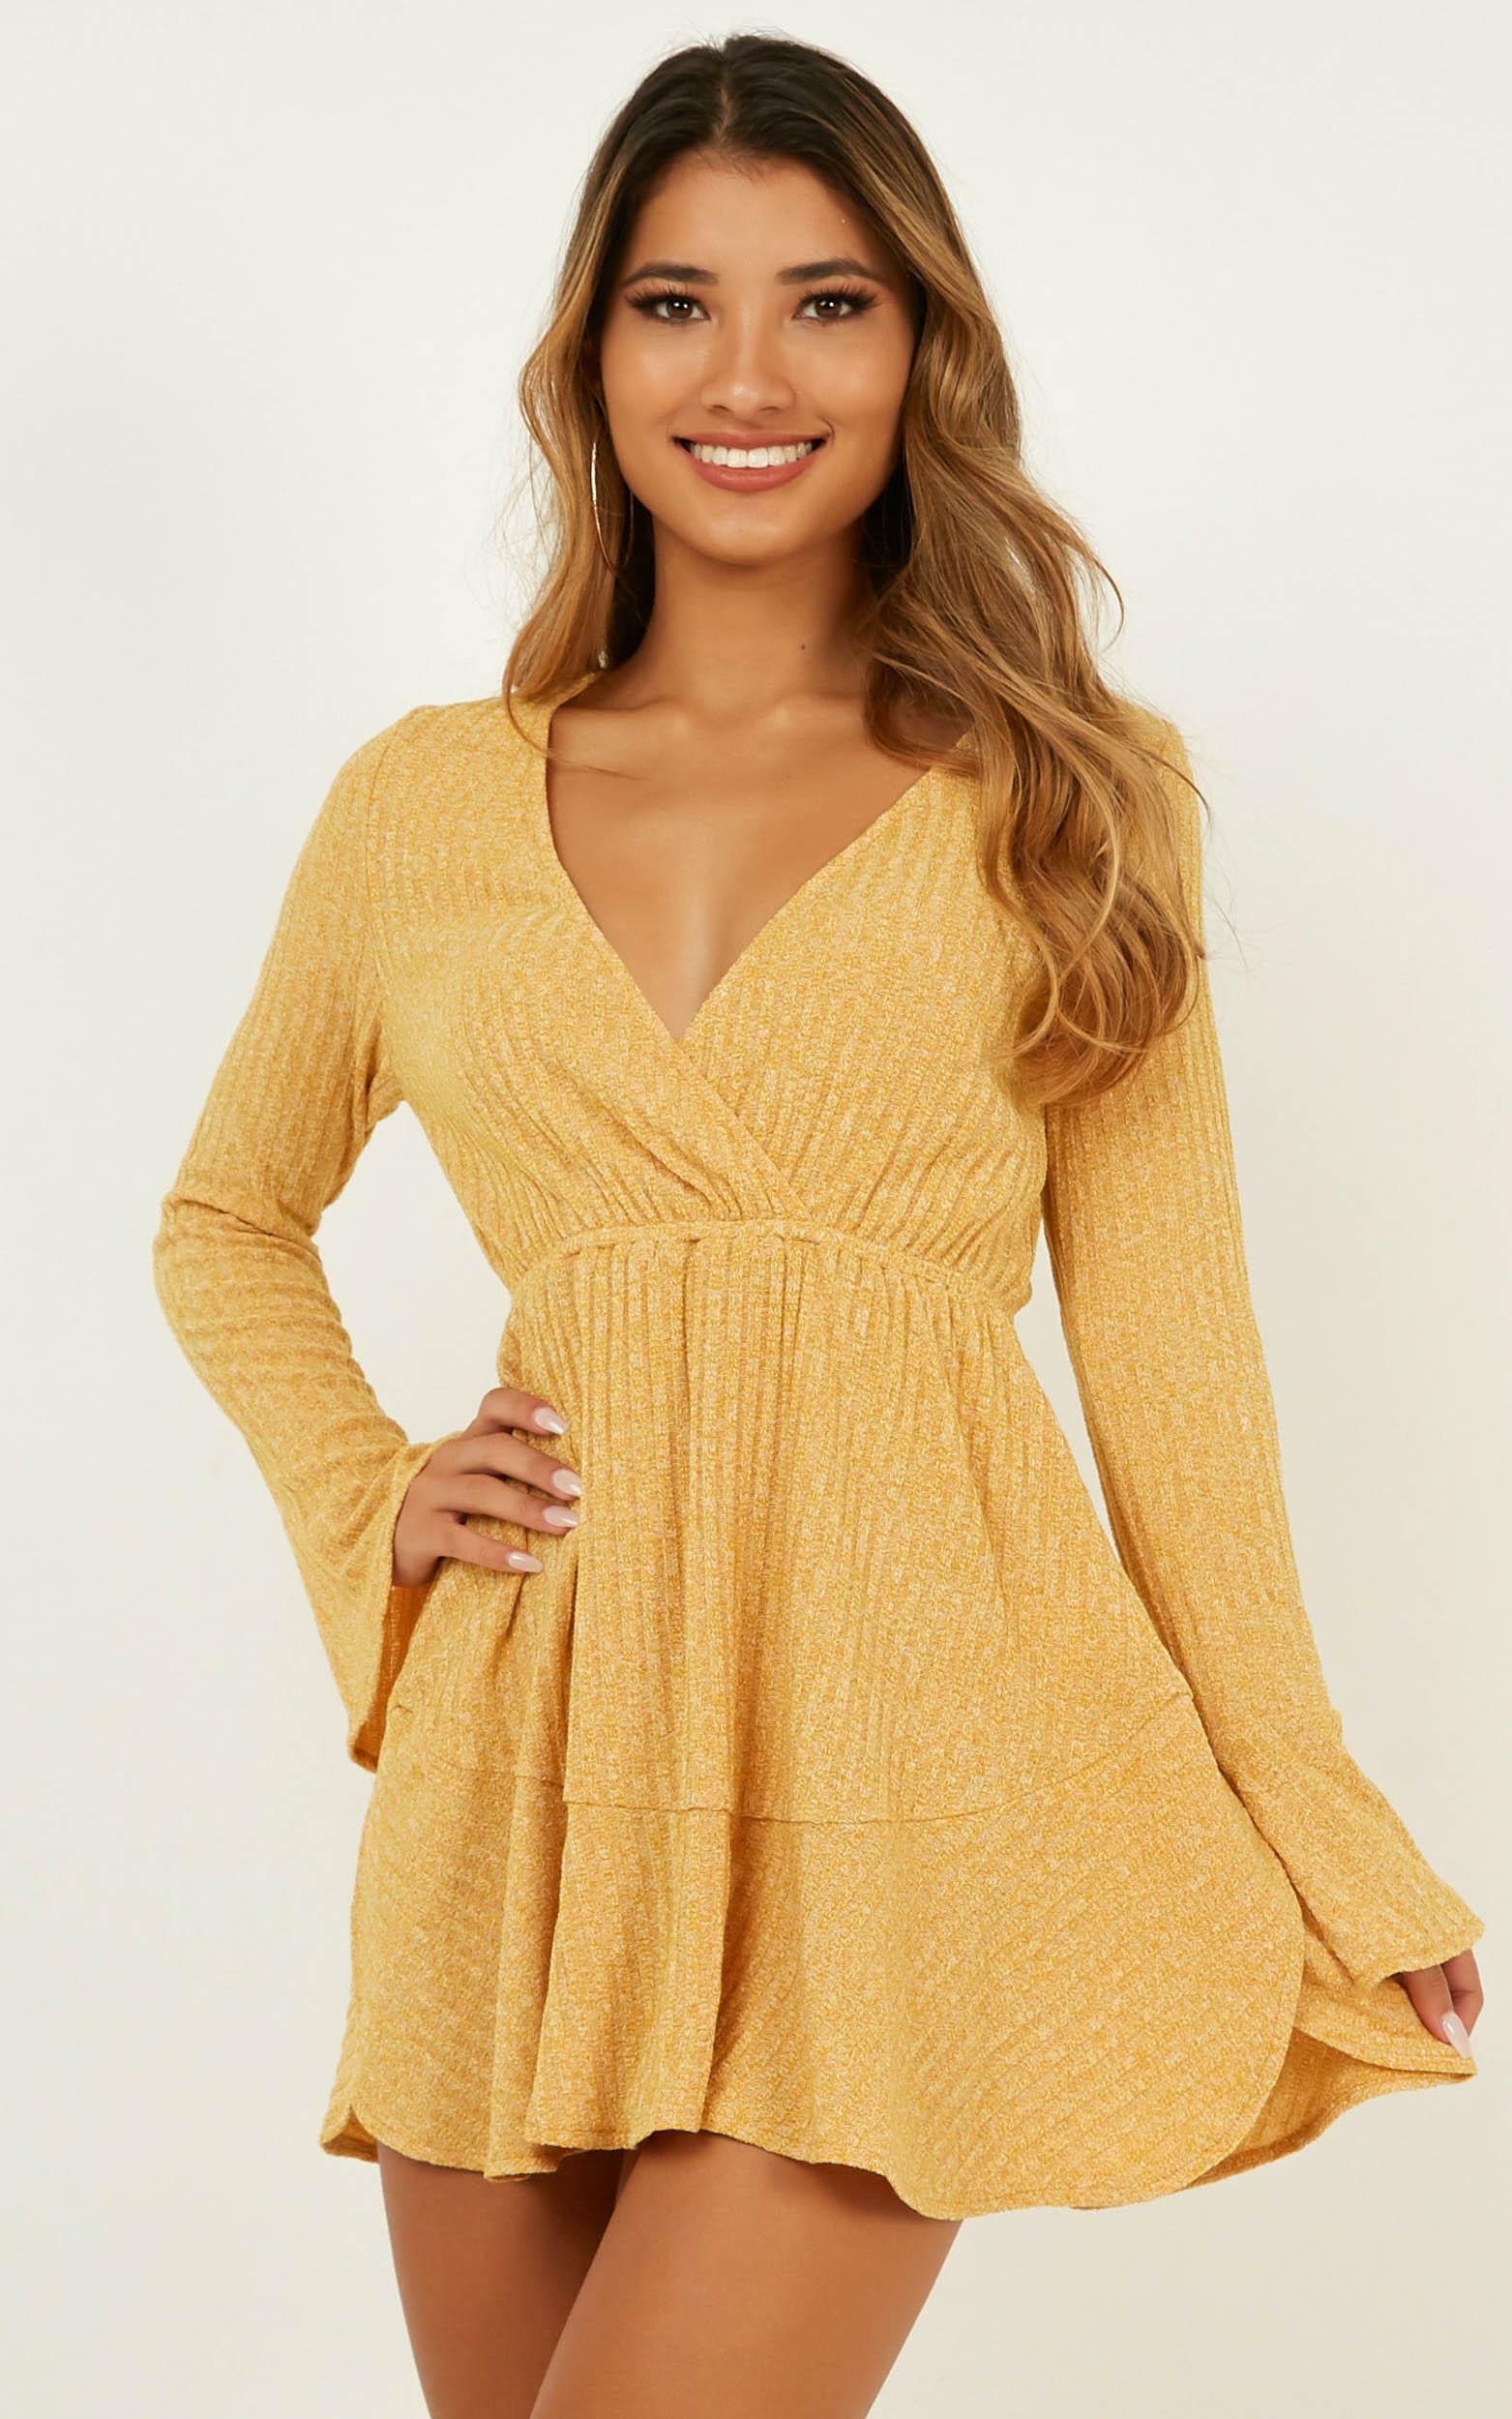 The Next Step Dress in Mustard Marle - 04, YEL5, hi-res image number null